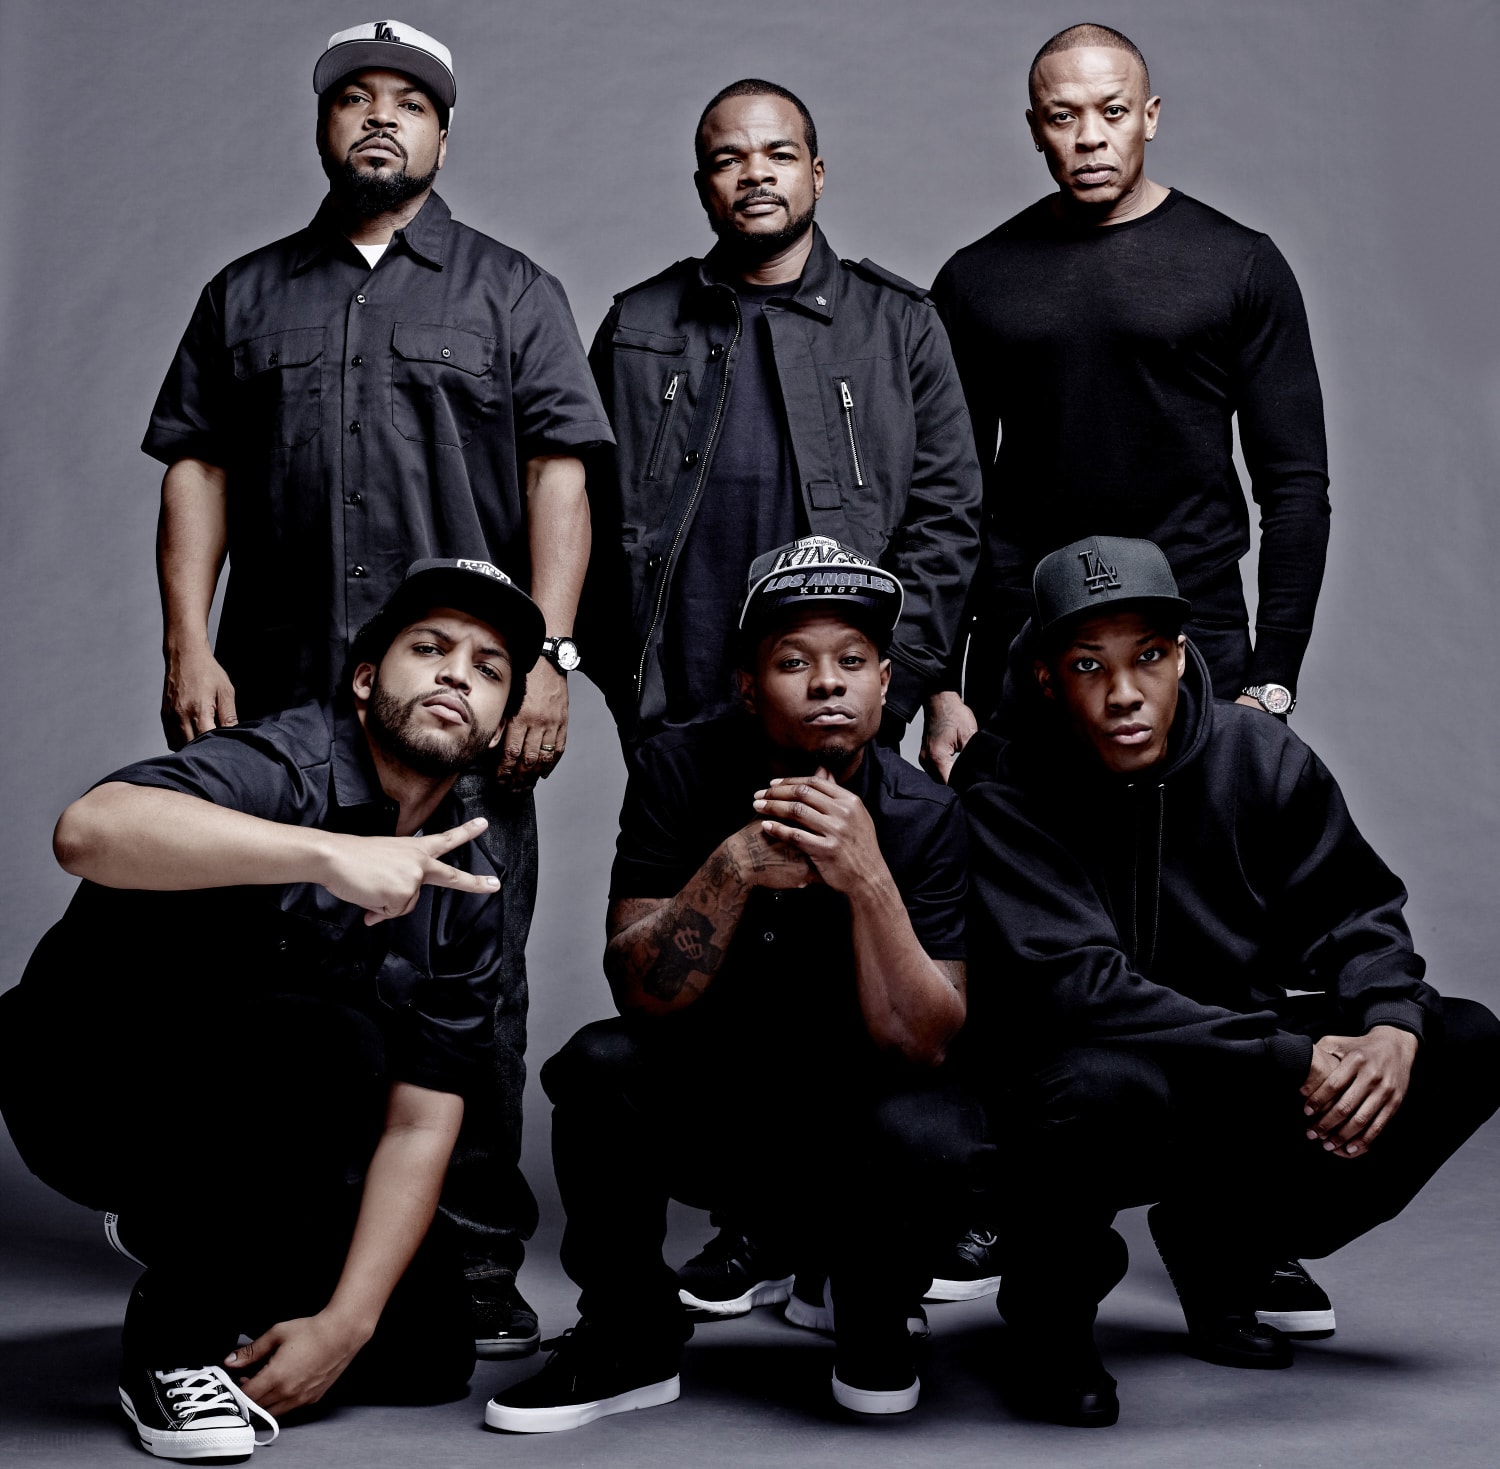 Making 'Straight Outta Compton': From the Streets to Silver Screen